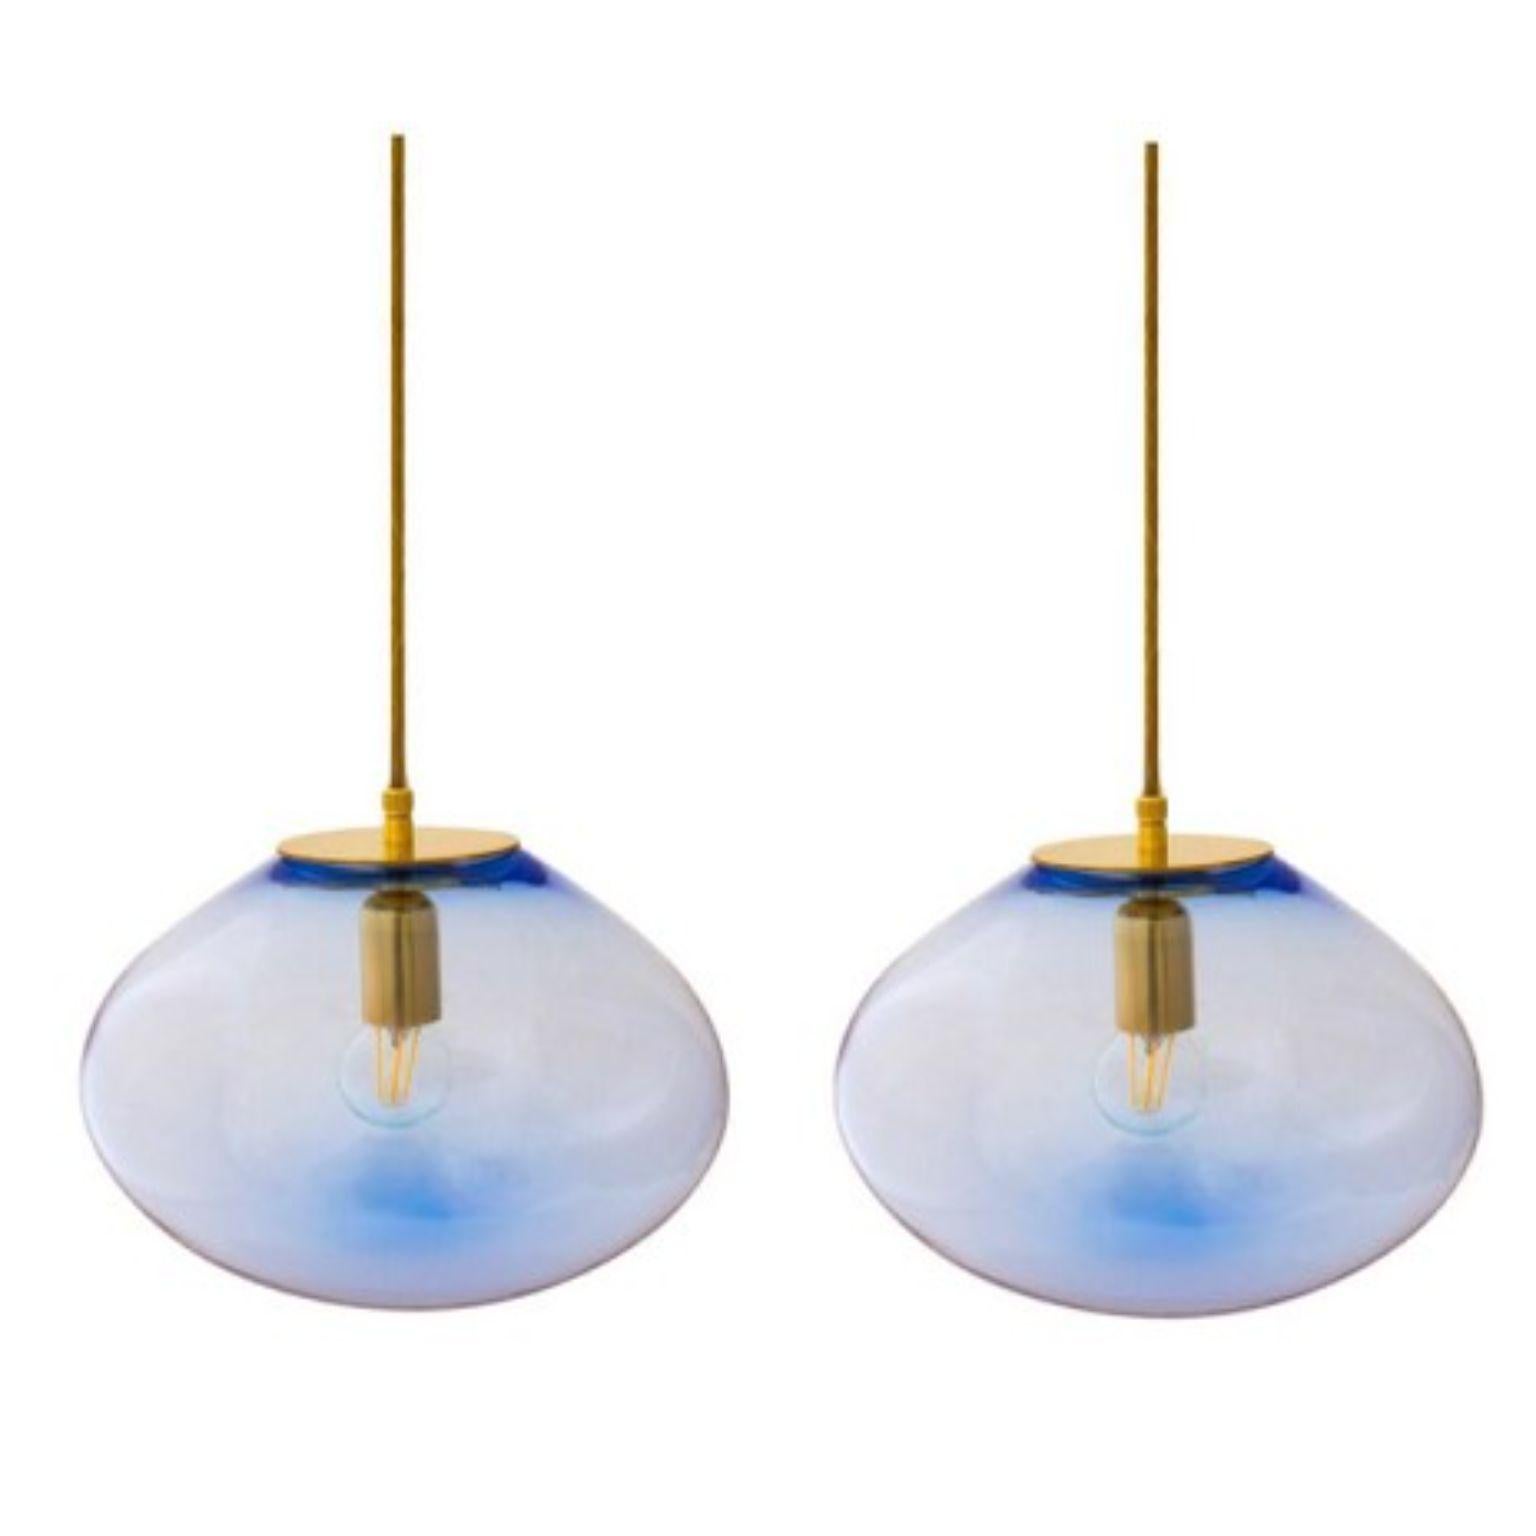 Set of 2 Planetoide vesta steel blue pendants by ELOA
Material: Glass,Steel,Silver, LED Bulb
Dimensions: D30 x W30 x H250 cm
Also Available in different colours and dimensions.

All our lamps can be wired according to each country. If sold to